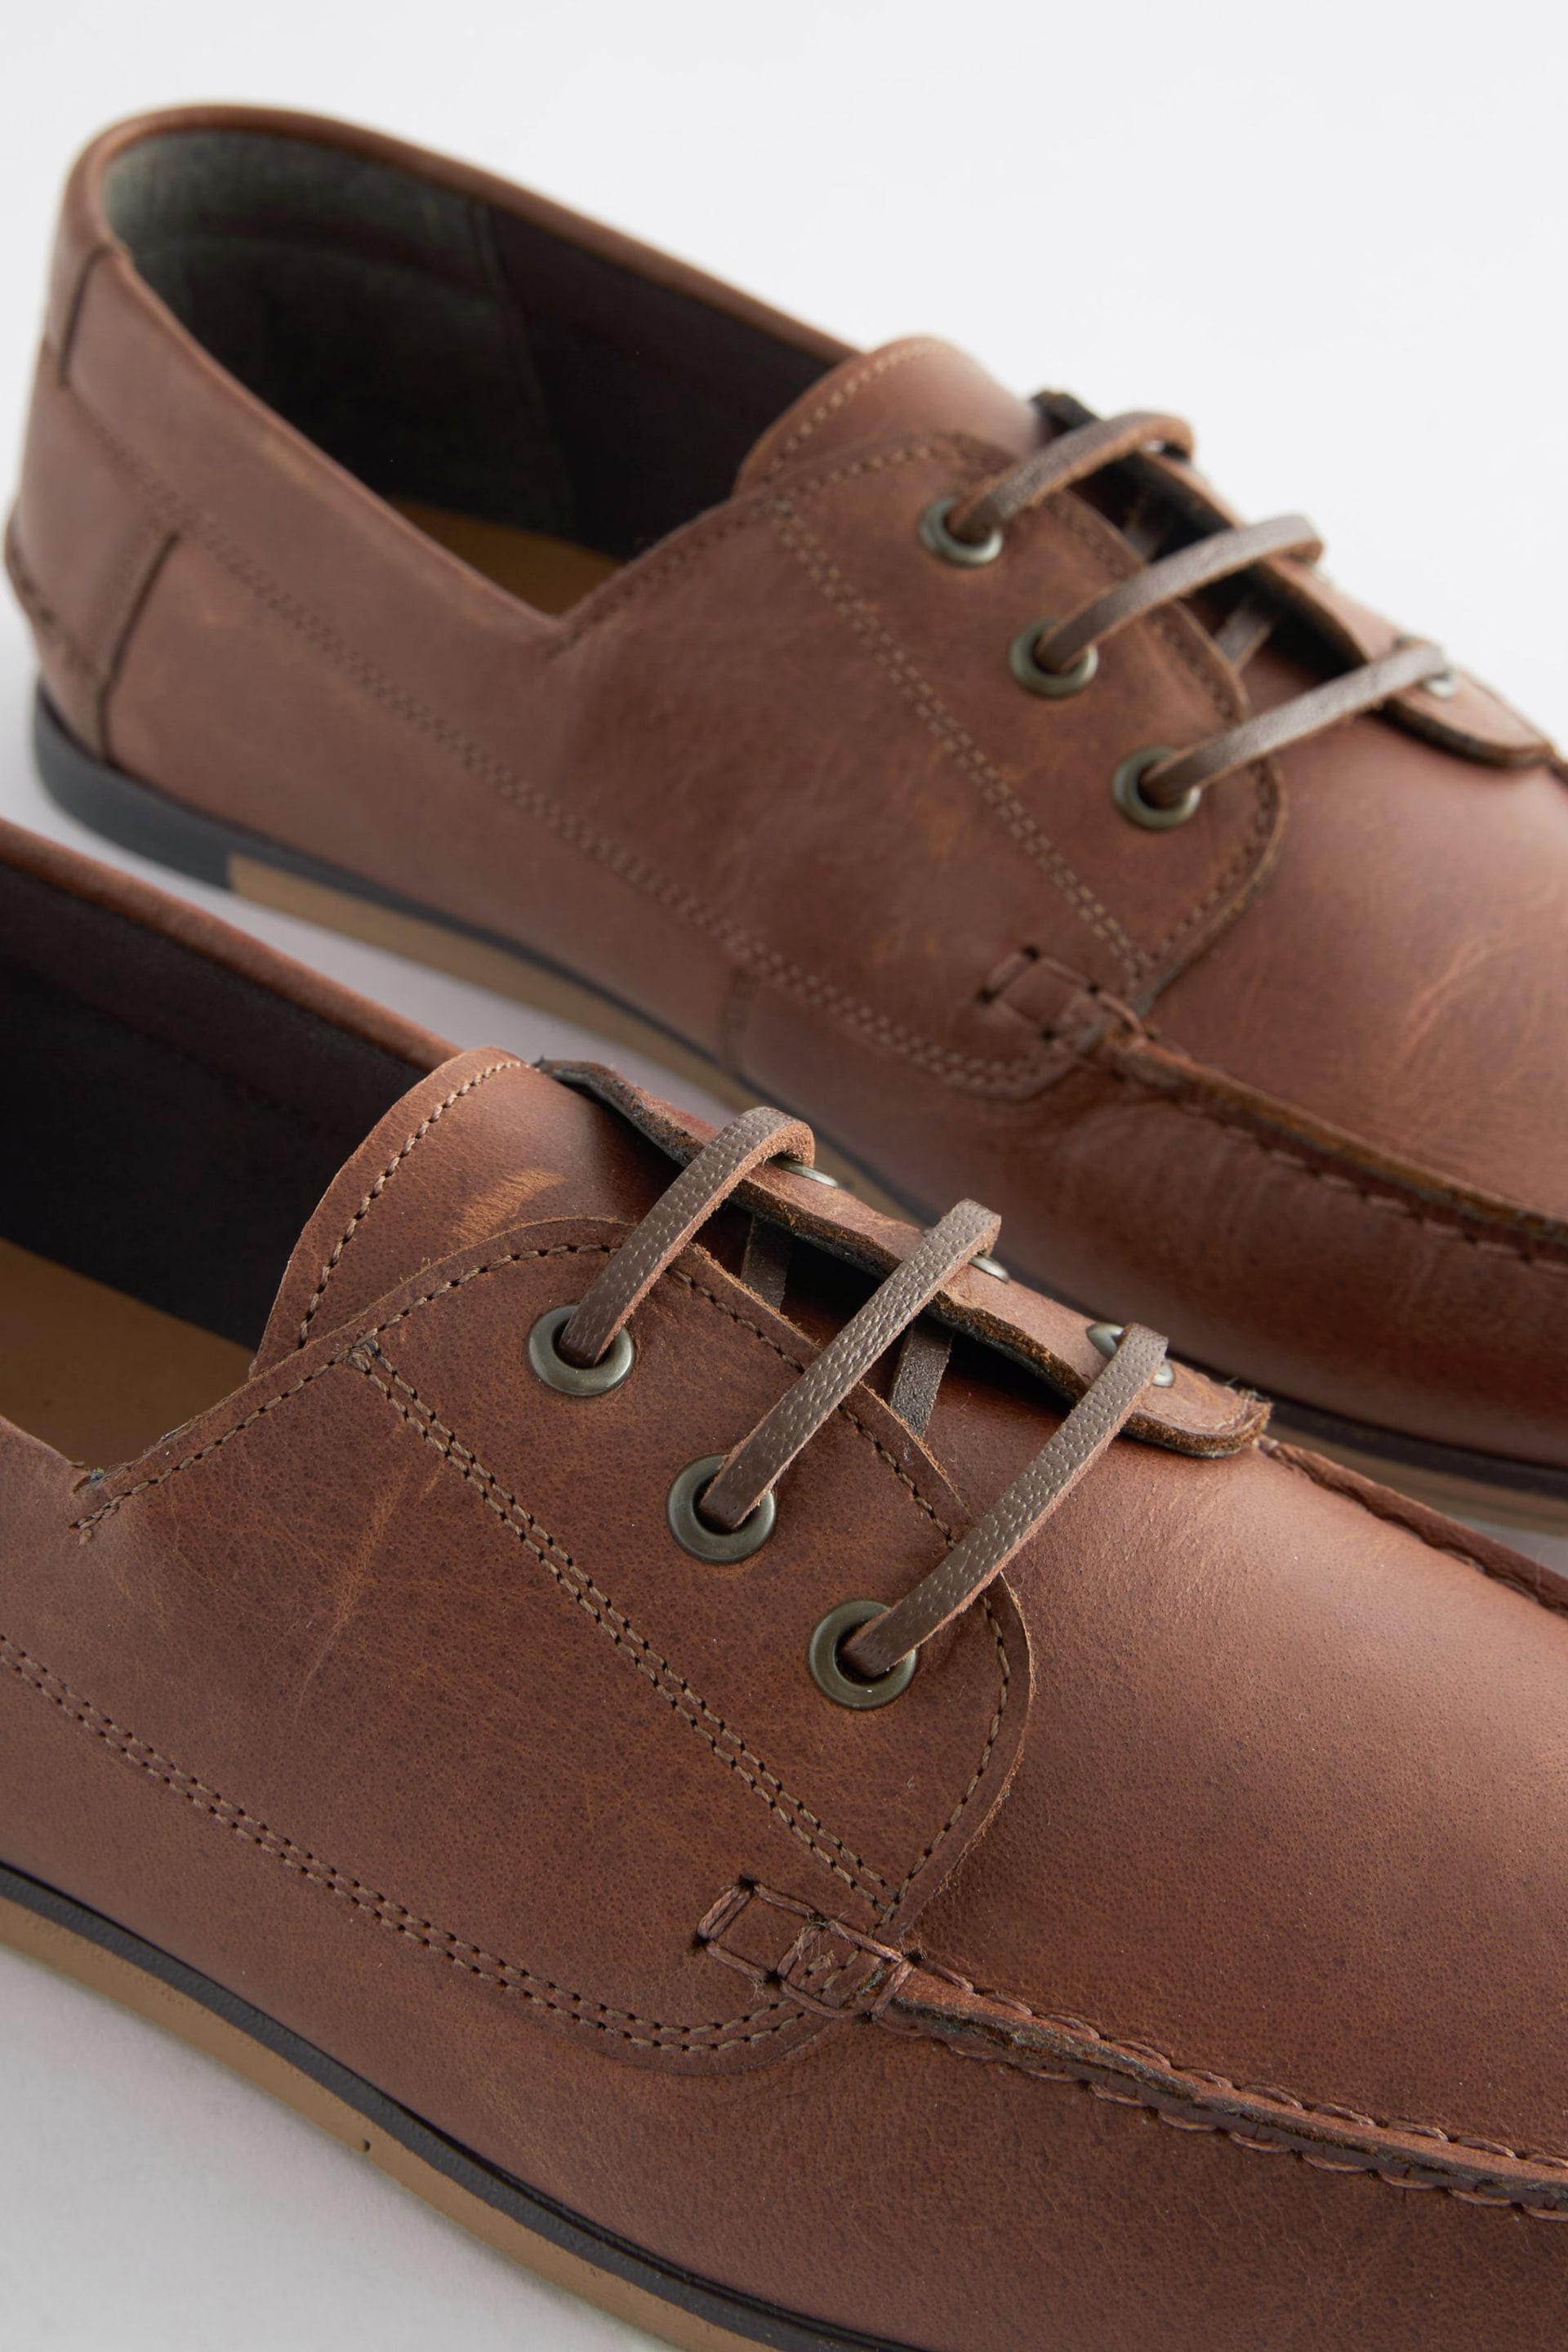 Tan Brown Formal Leather Boat Shoes - Image 5 of 7